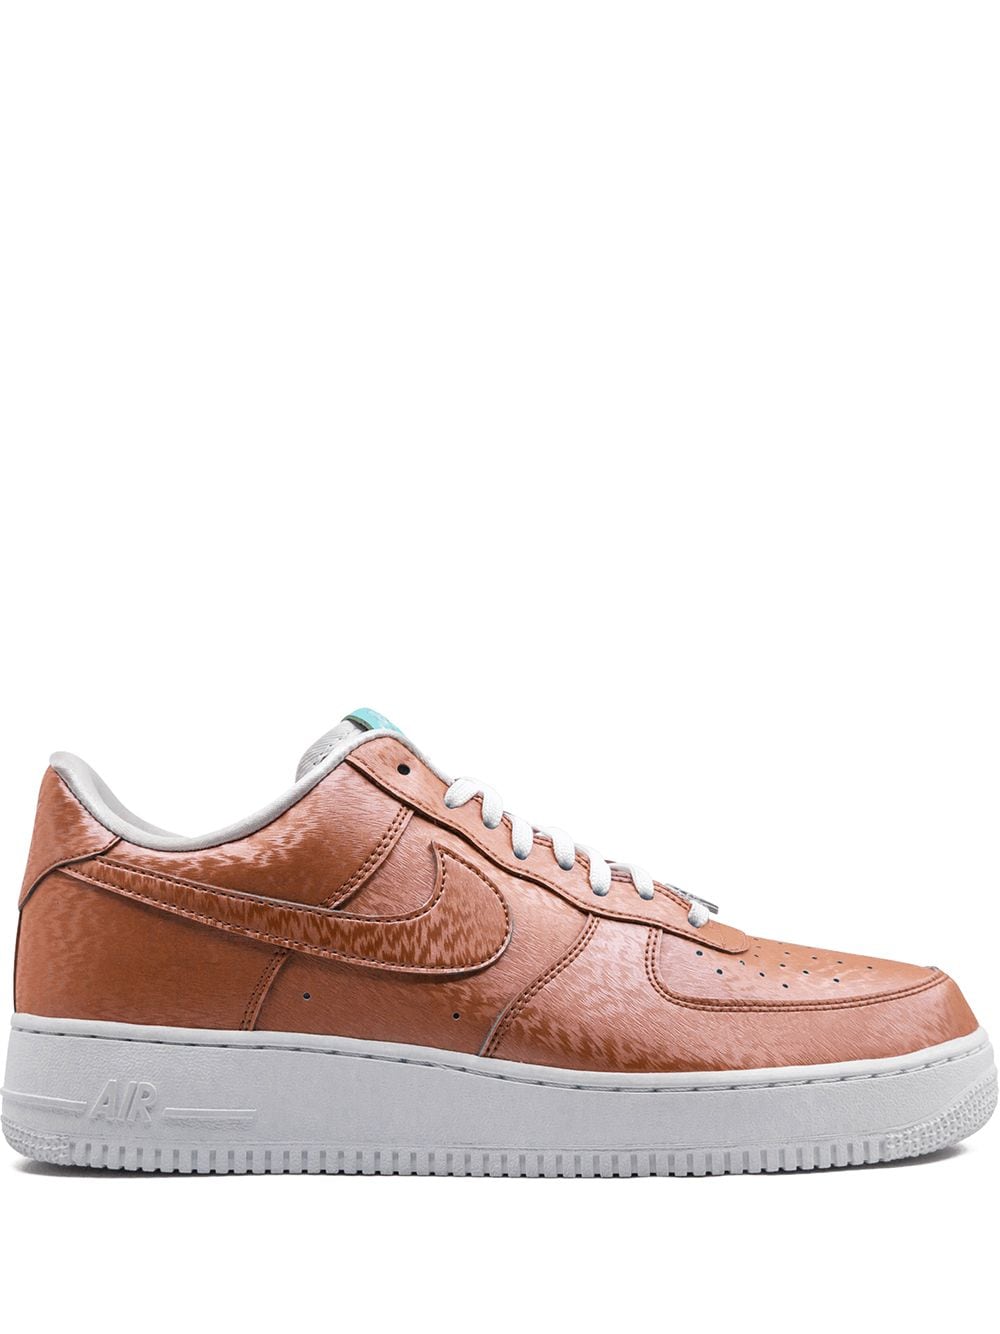 Nike Air Force 1 '07 LV8 QS "Statue Of Liberty" sneakers - Pink von Nike